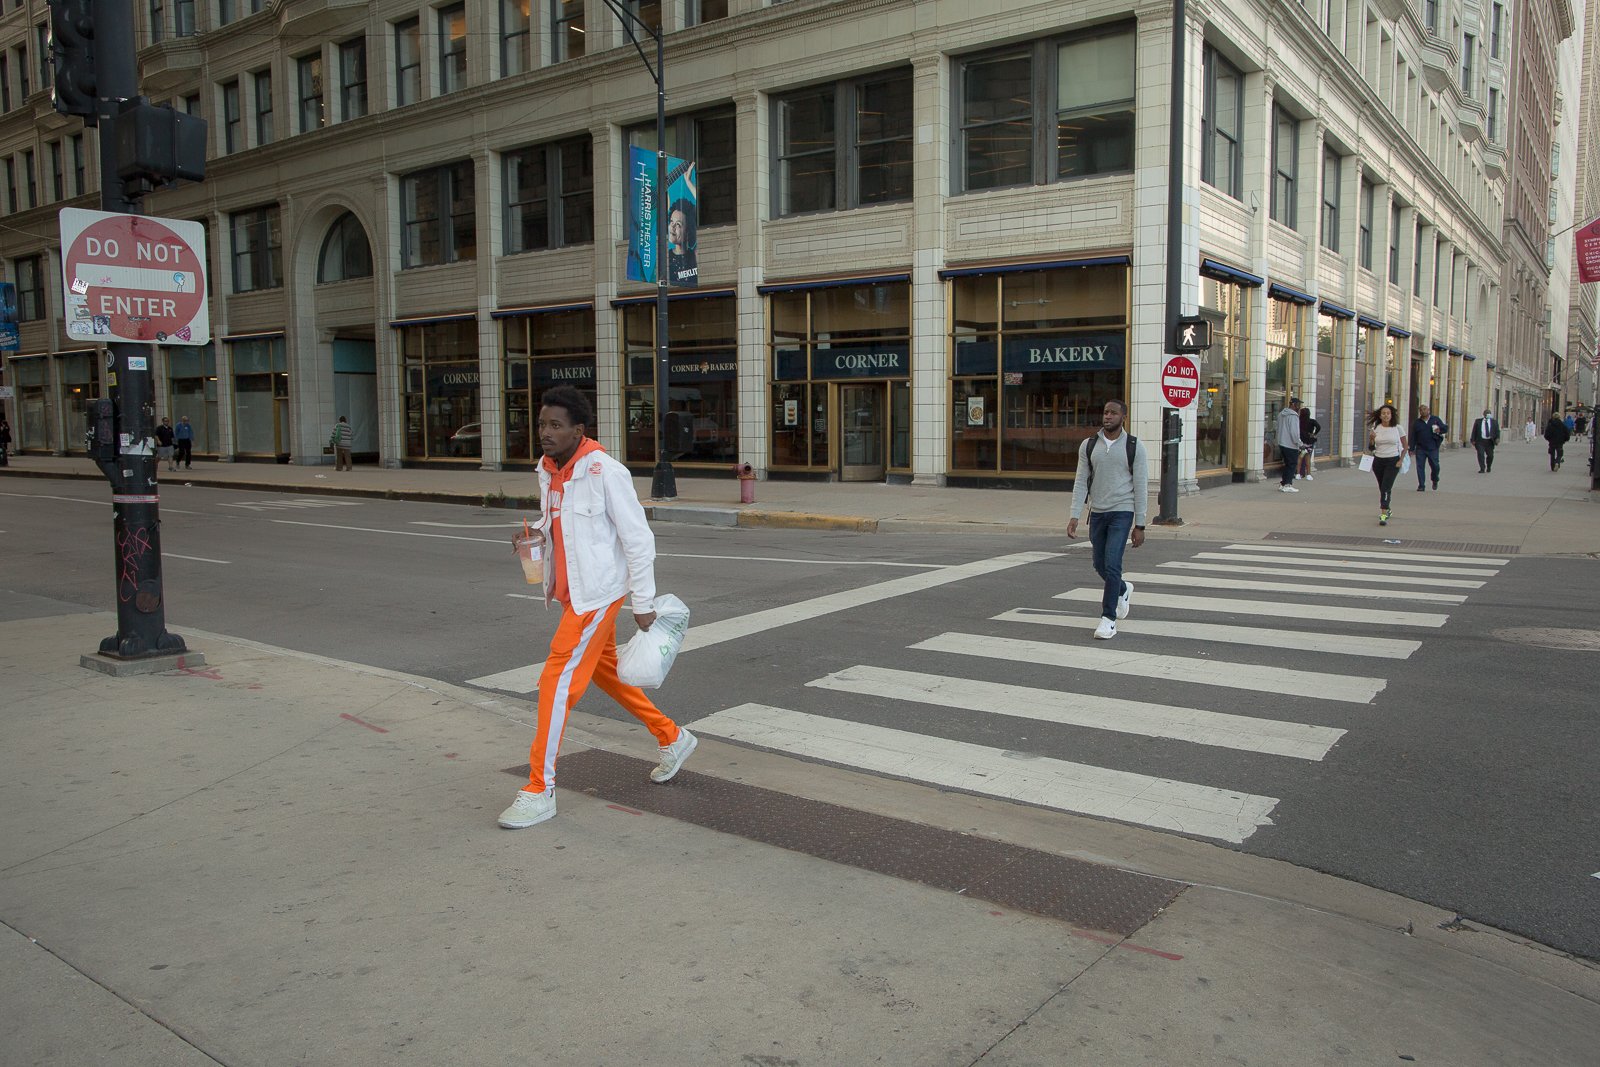 People crossing a cross walk in a city, looking at camera